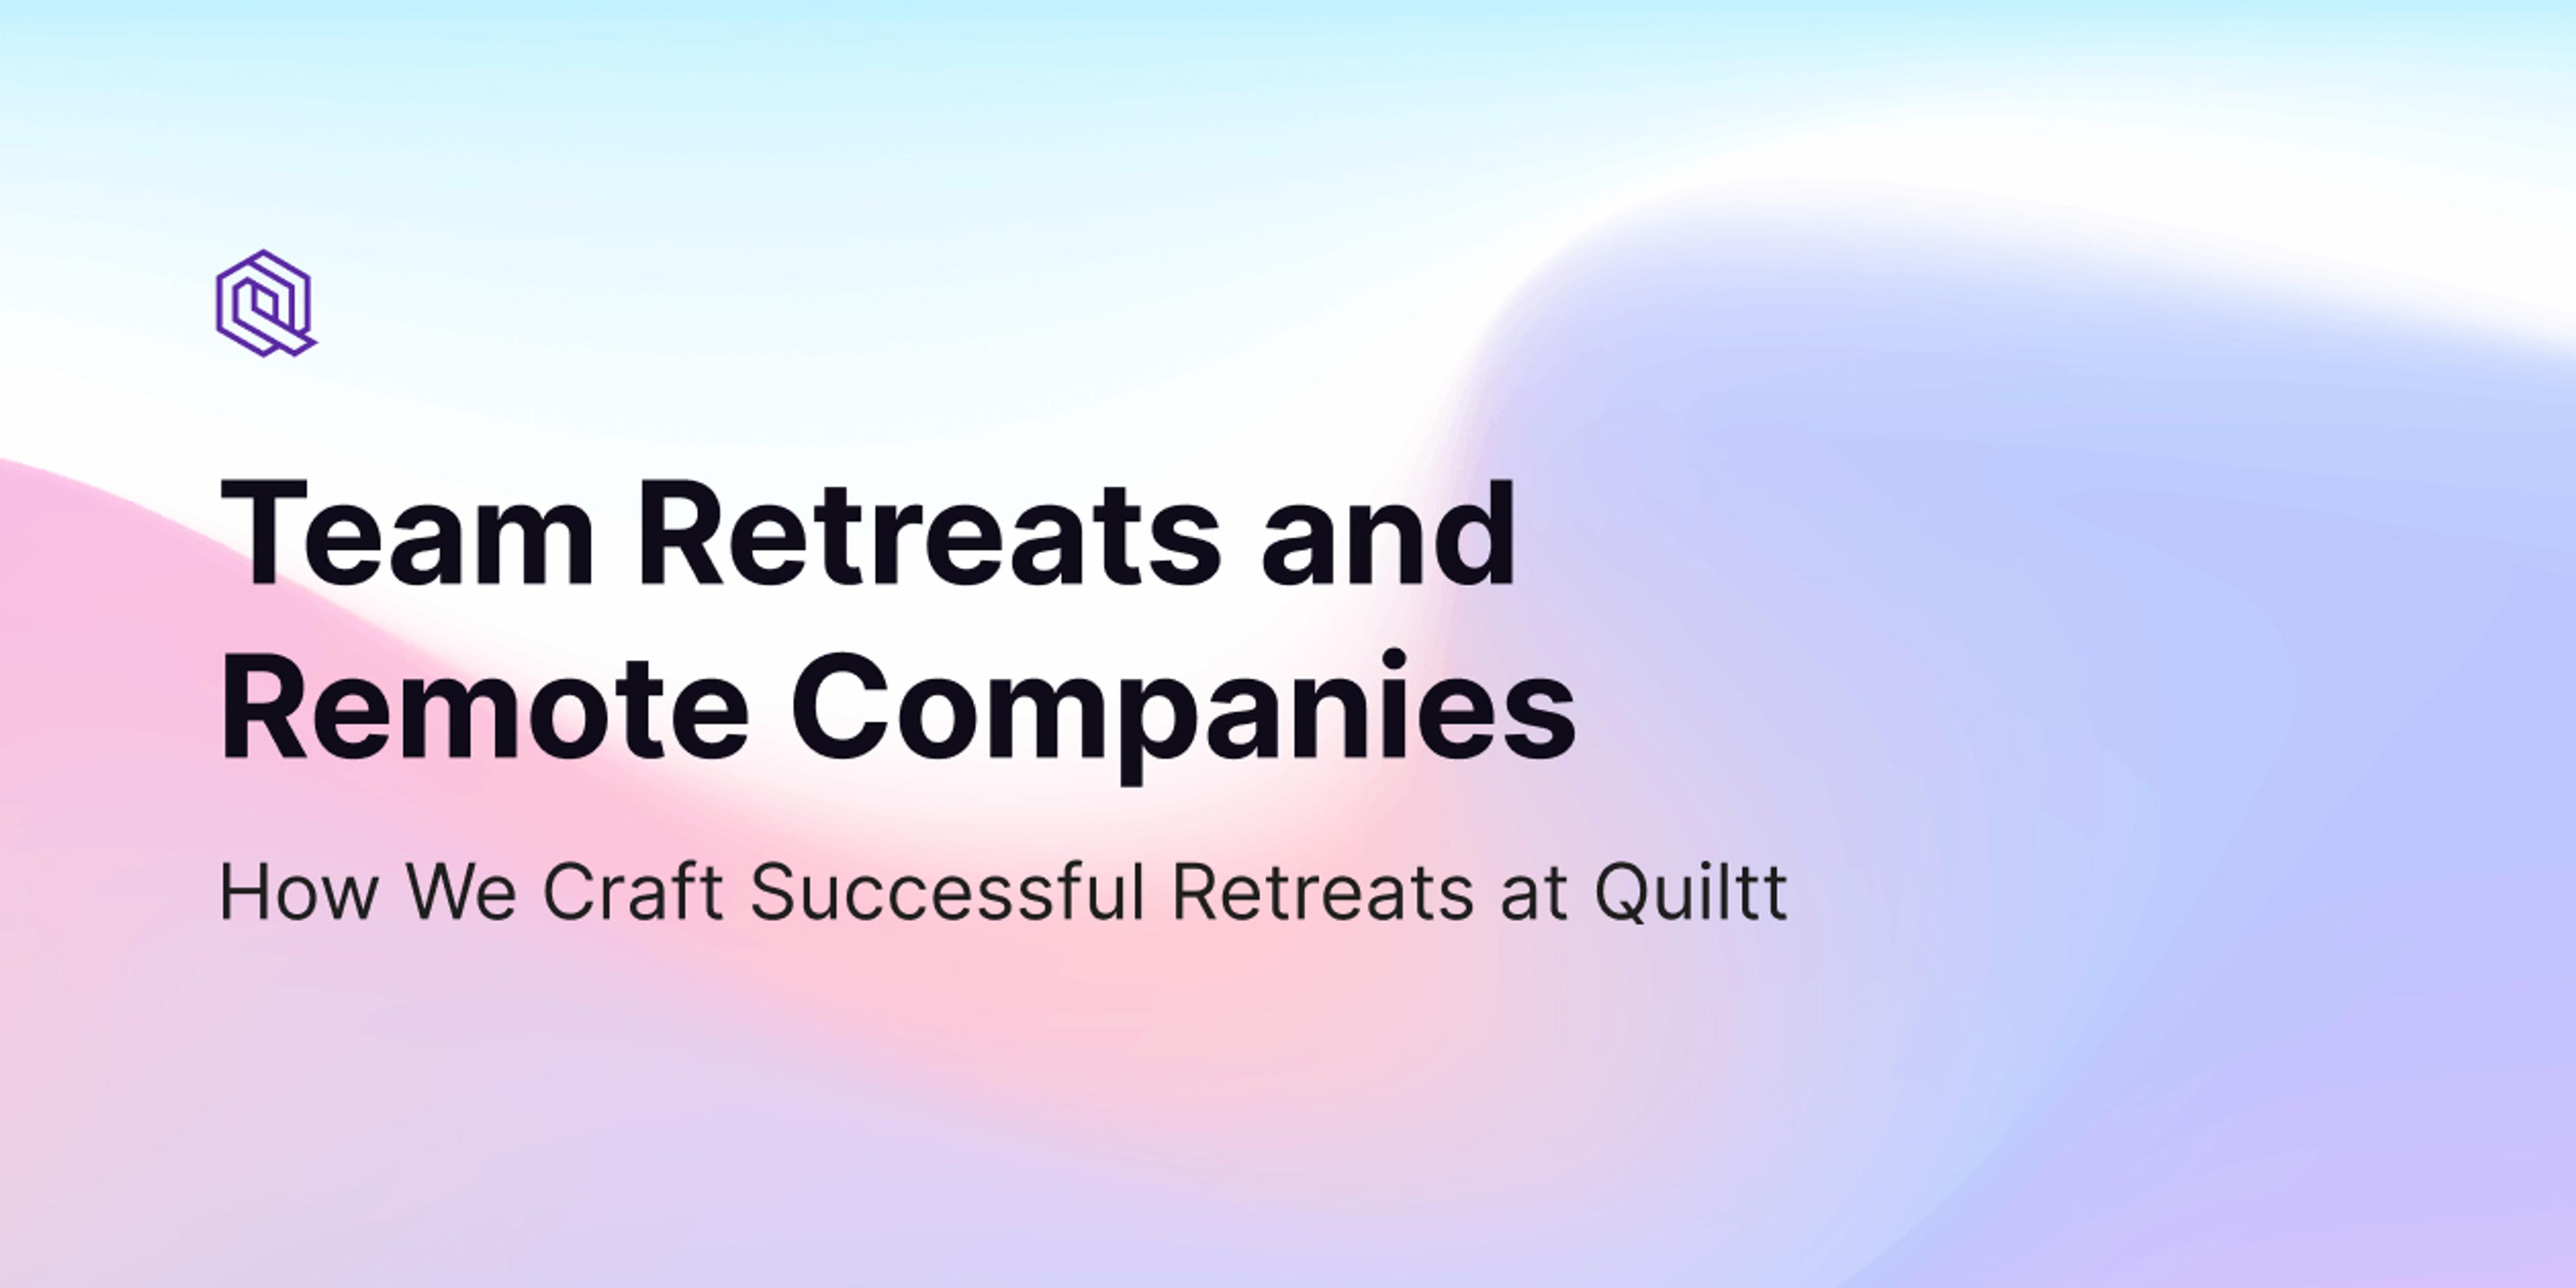 Team Retreats and Remote Companies: How We Craft Successful Retreats at Quiltt Post Image